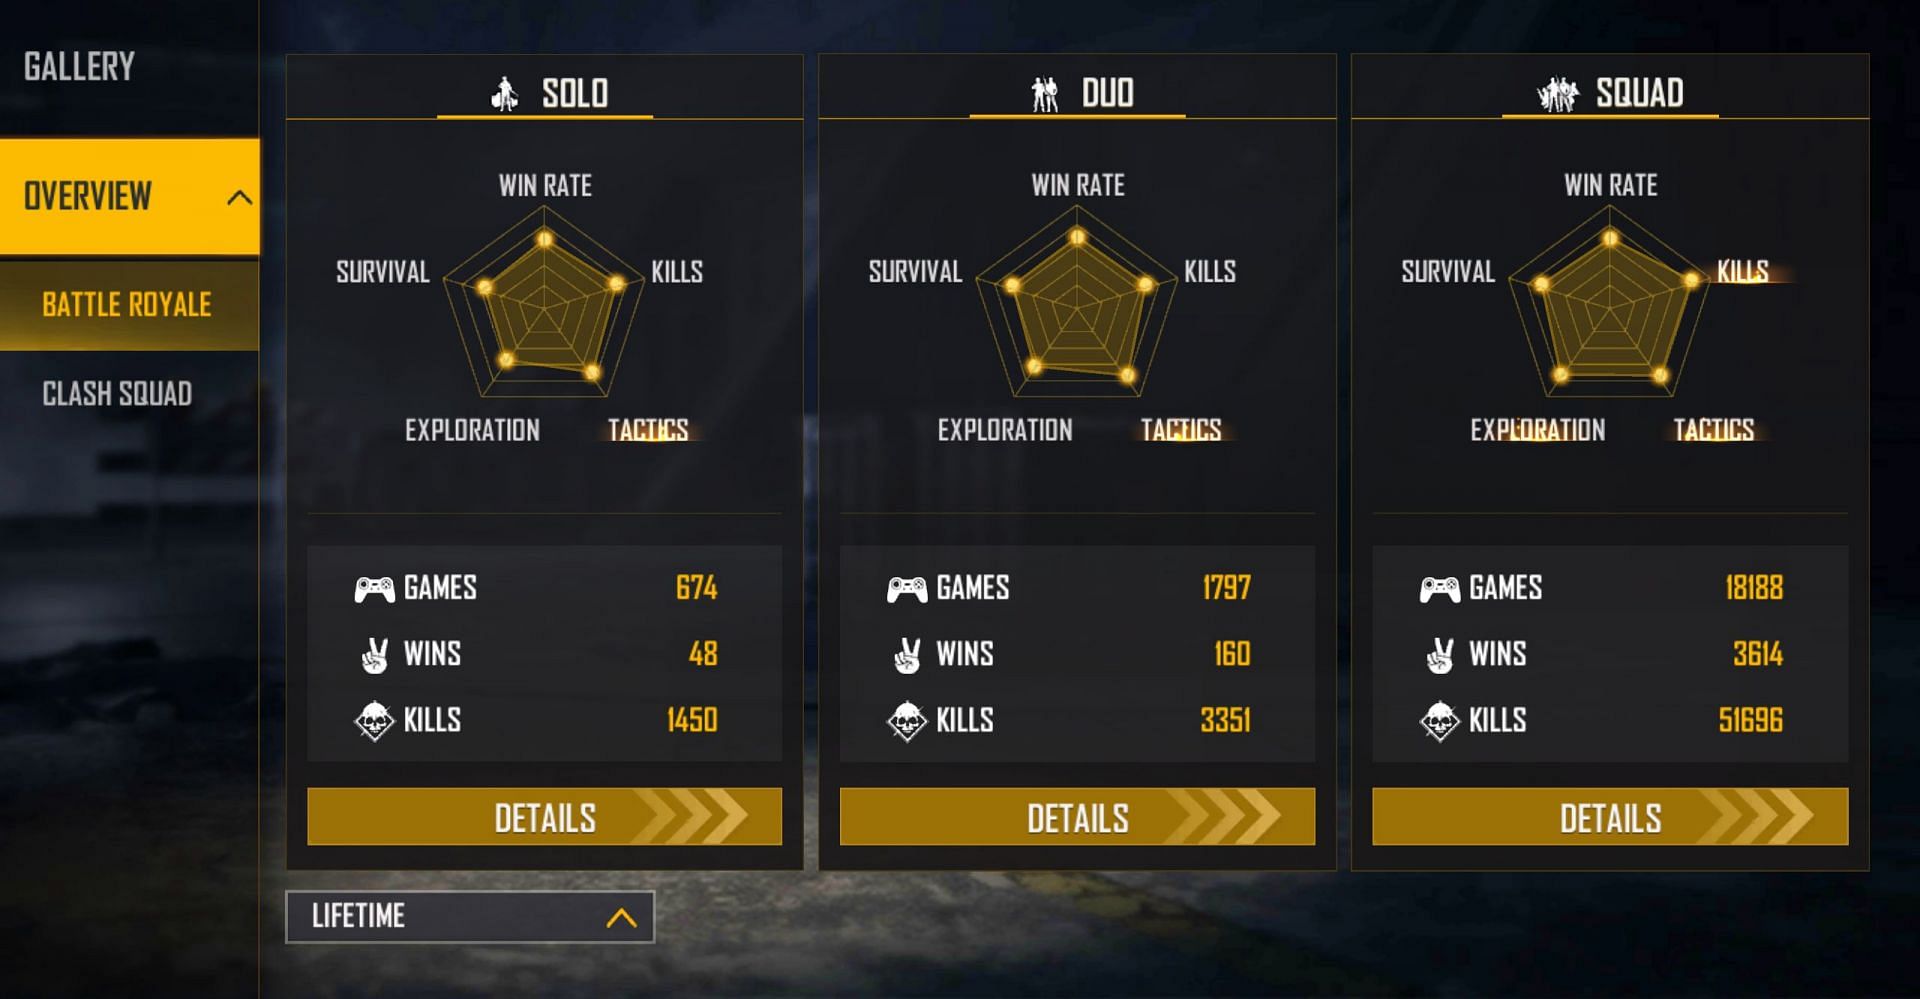 He has incredible lifetime stats in the game (Image via Free Fire)